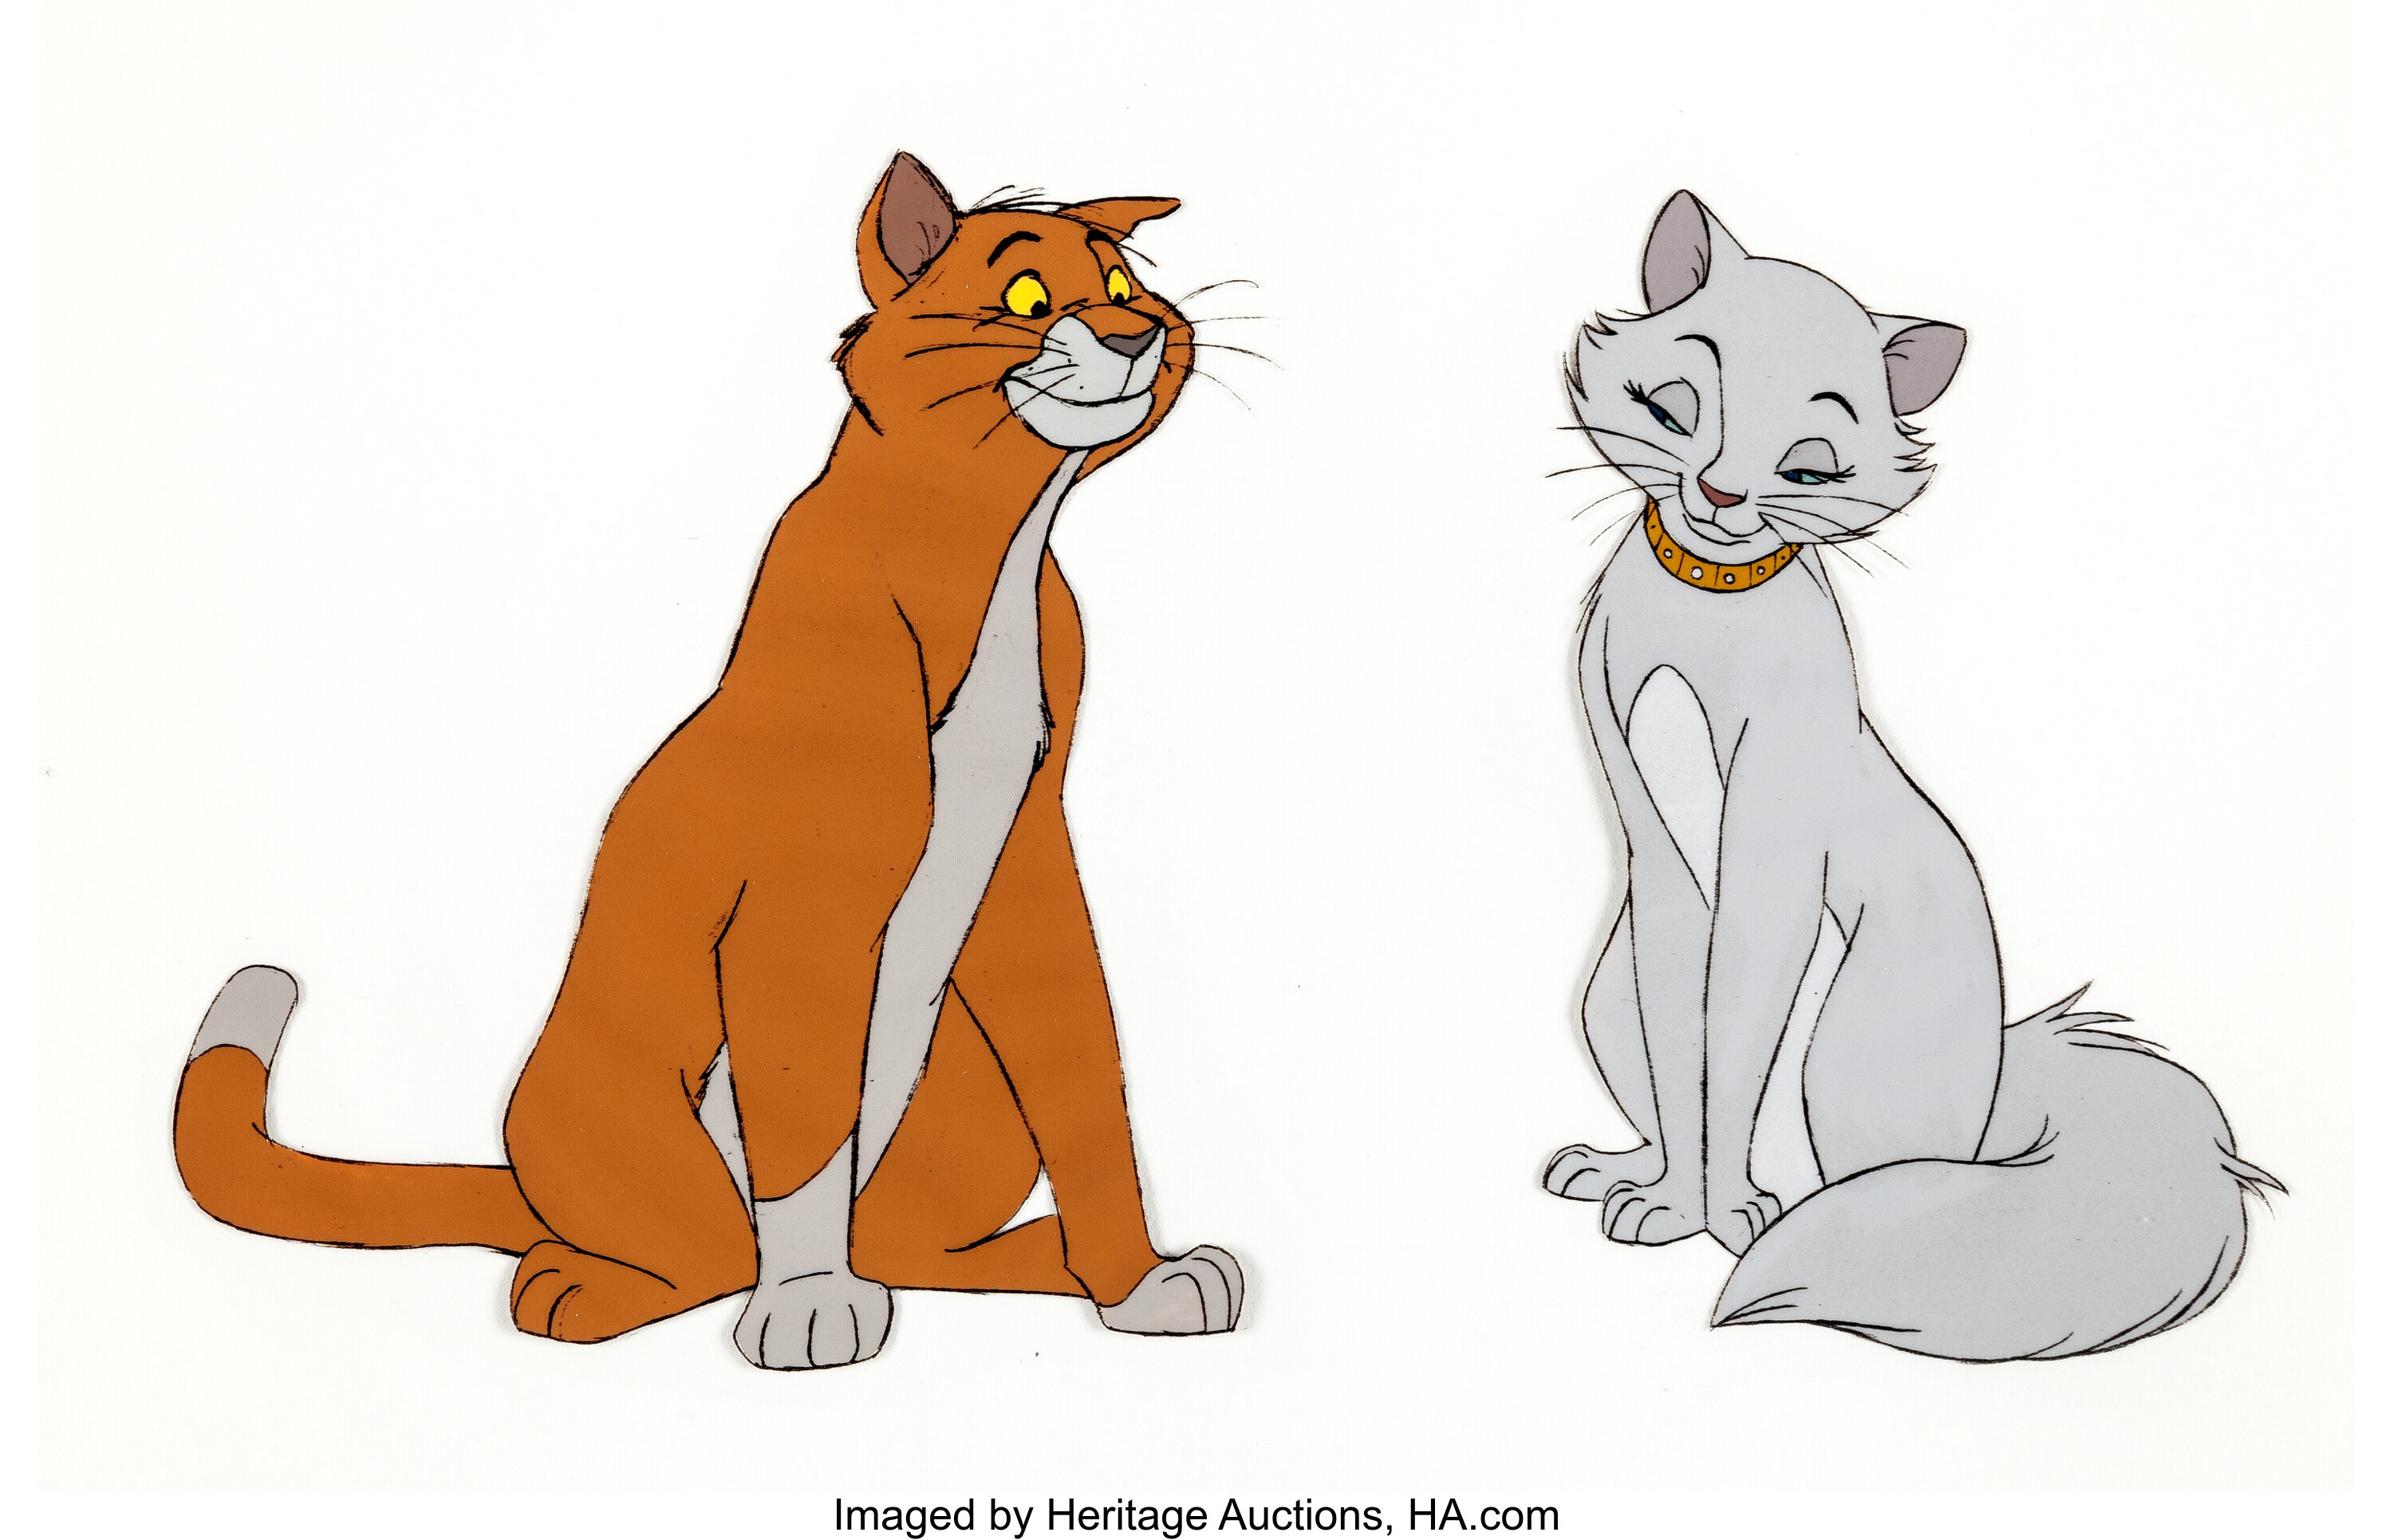 Original Walt Disney Production Celluloid With Background Featuring Thomas  O'Malley And Duchess From The Aristocats By WALT DISNEY STUDIOS On David